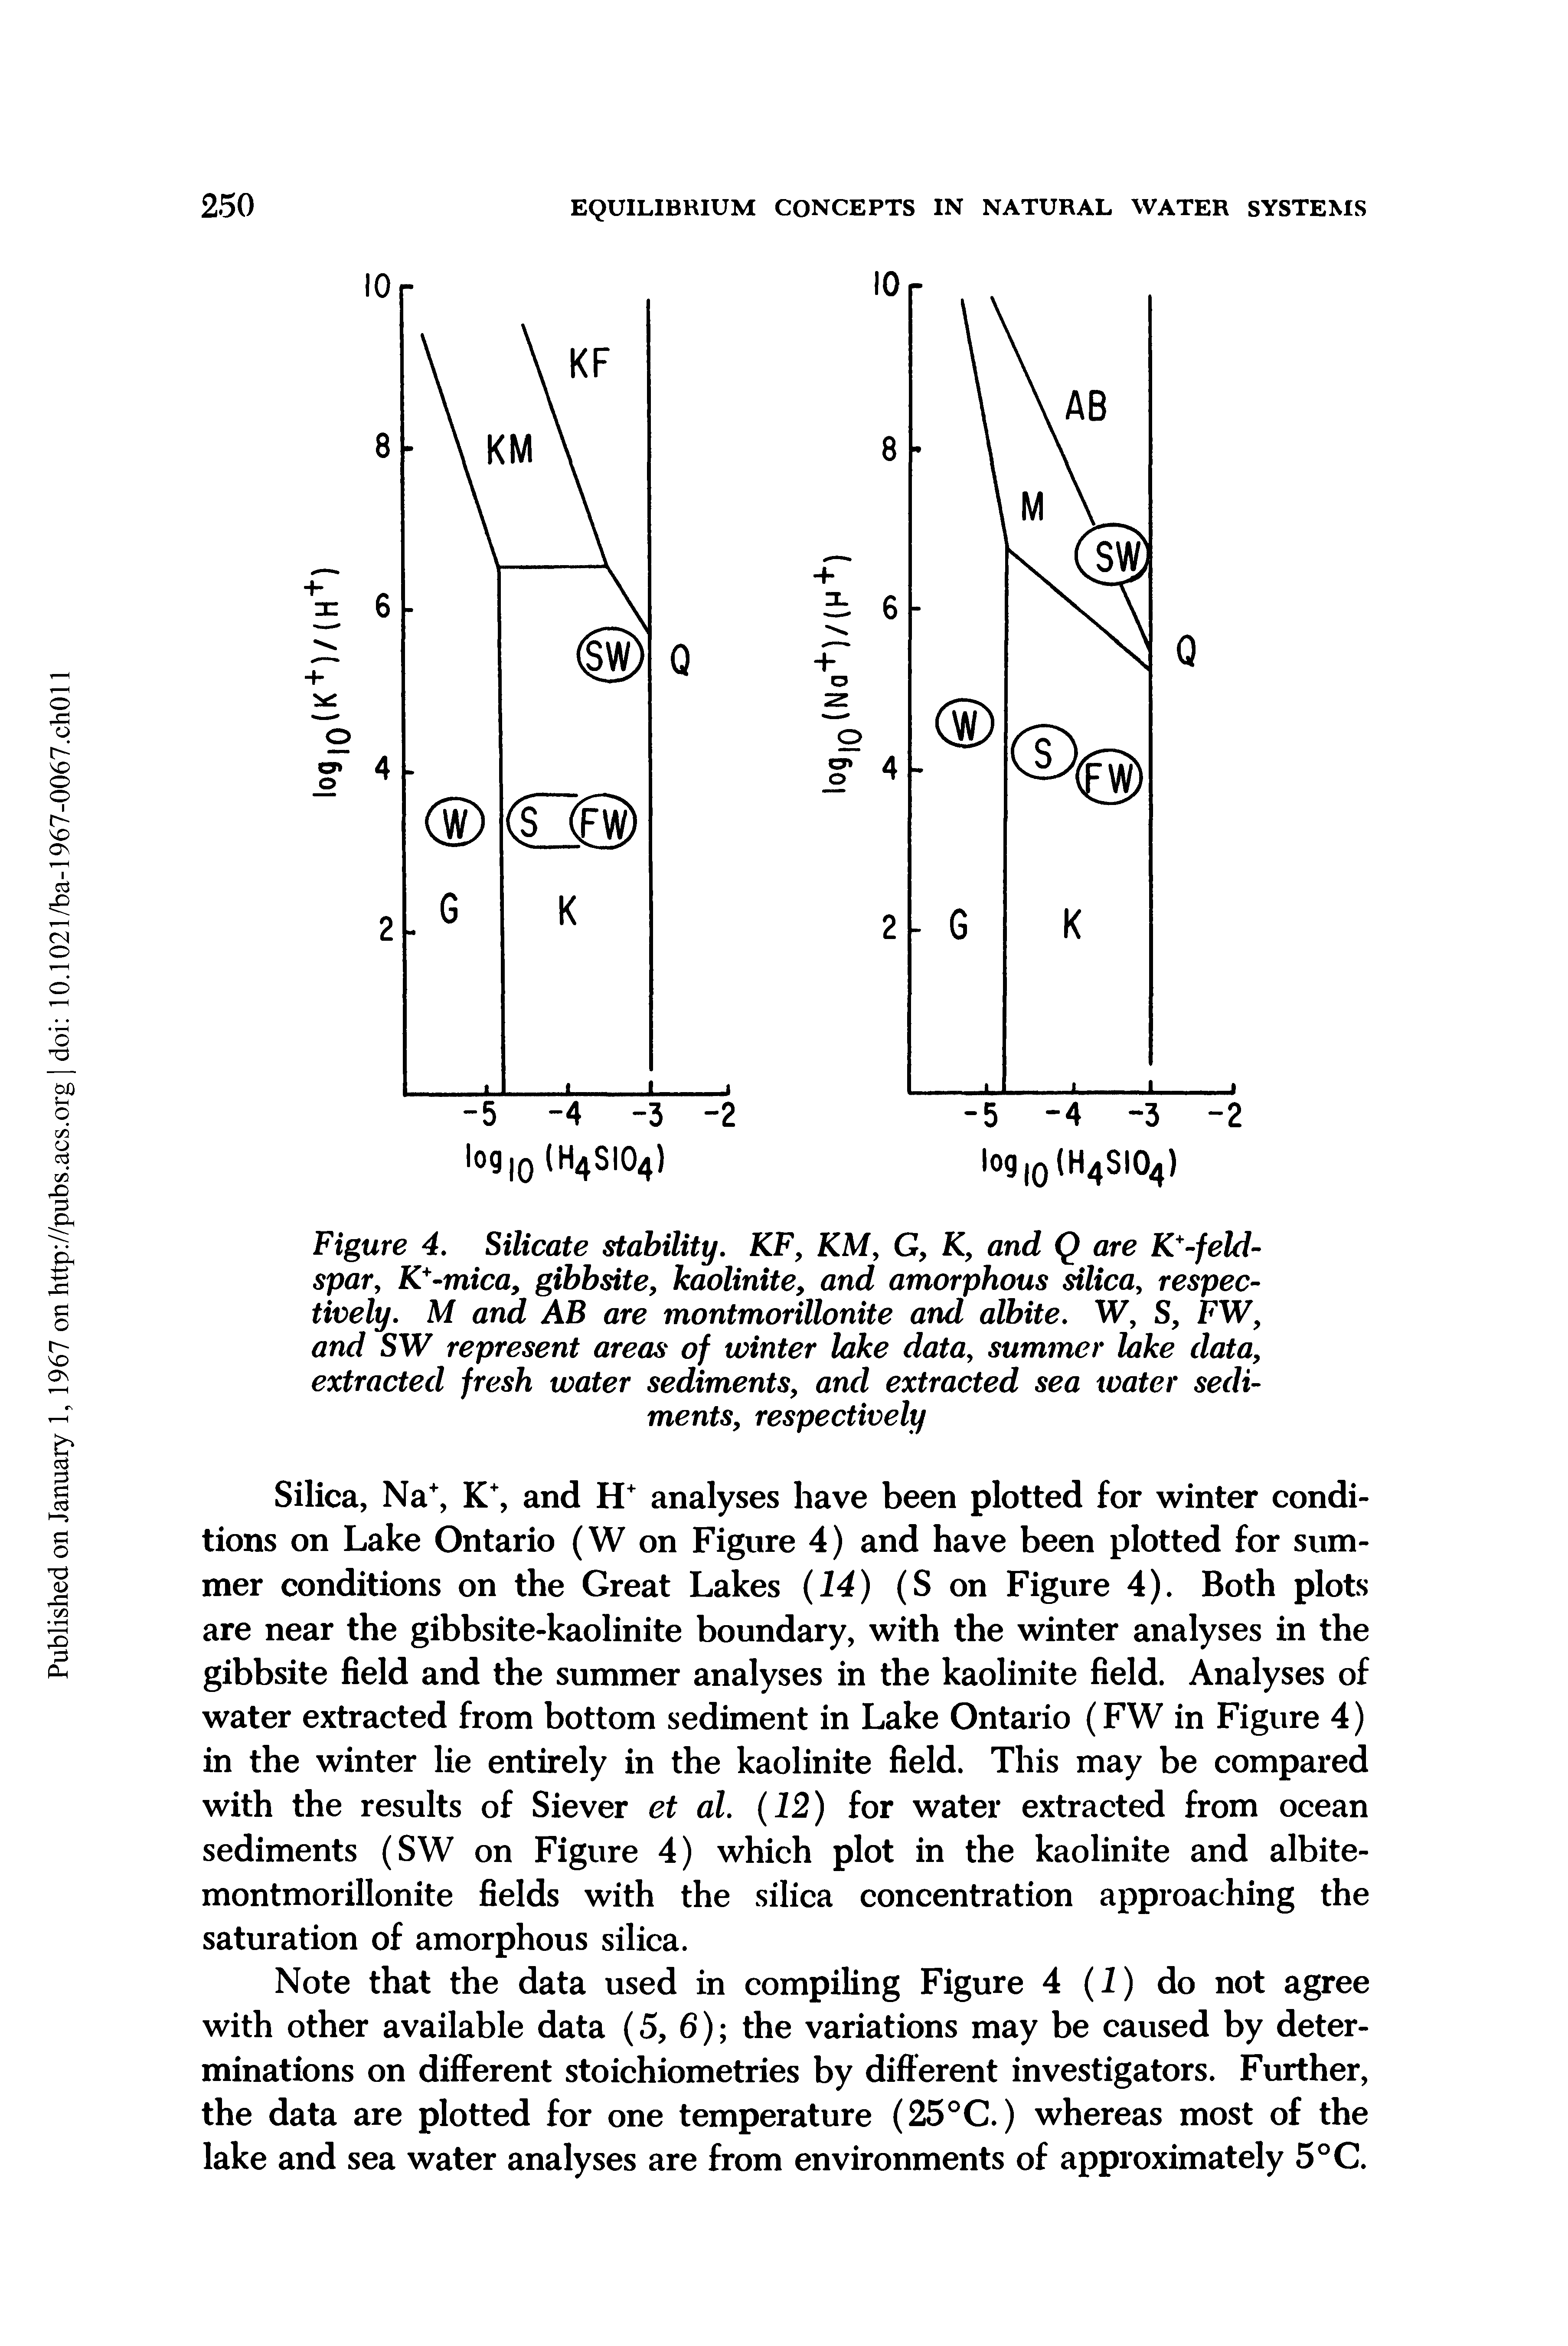 Figure 4. Silicate stability. KF, KM, G, K, and Q are K+-feld-spar, K+-mica, gibbsite, kaolinite, and amorphous silica, respectively. M and AB are montmorillonite and albite. W, S, FW, and SW represent areas of winter lake data, summer lake data, extracted fresh water sediments, and extracted sea water sediments, respectively...